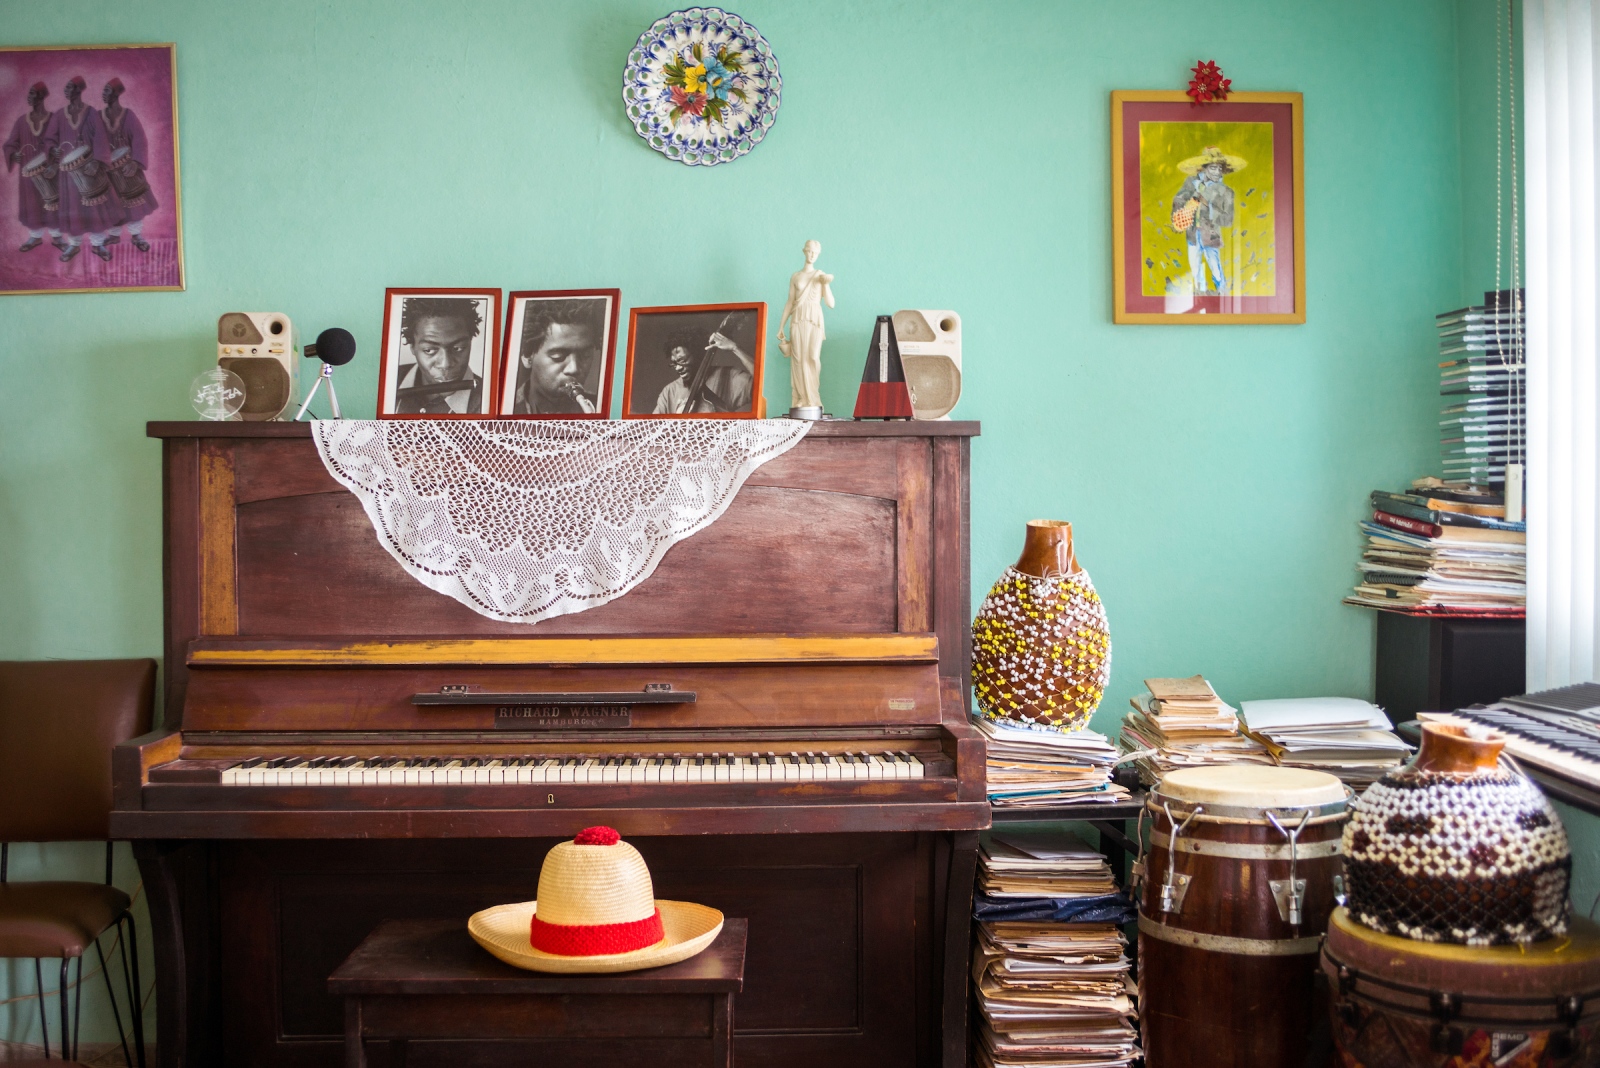 Recent Work - The hat of Eladio 'Don Pancho' Terry sits on his piano...